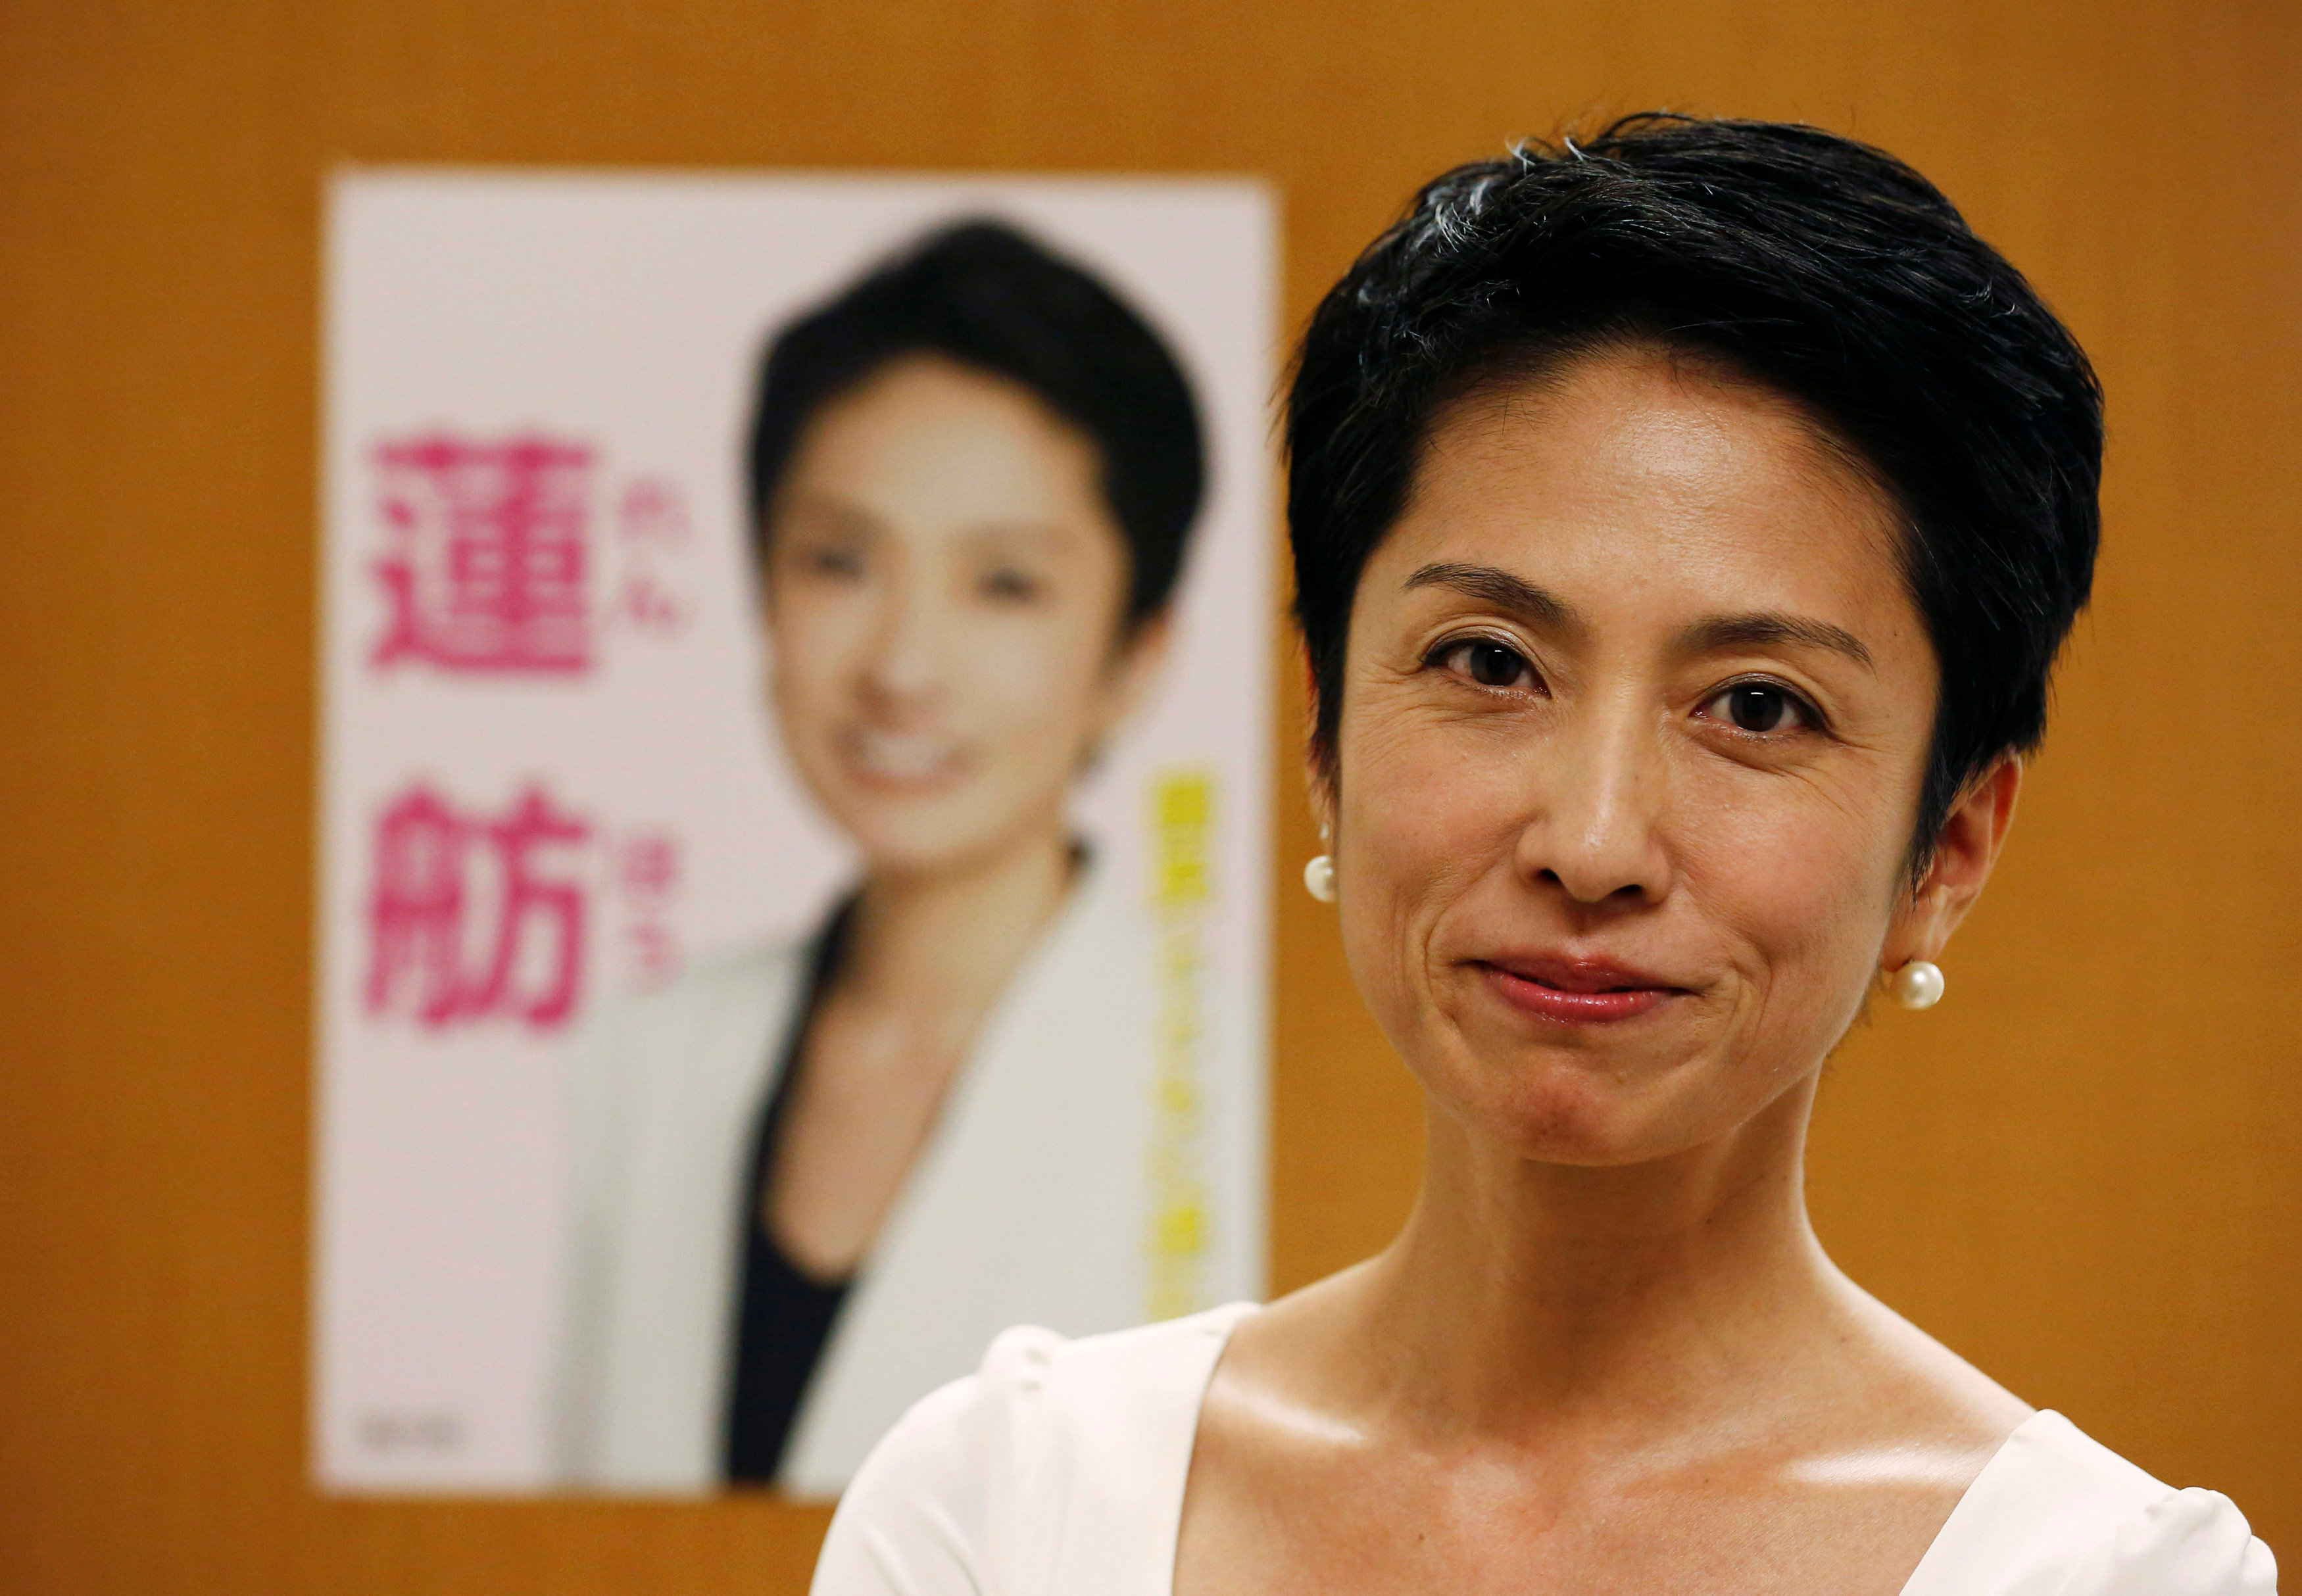 Front-runner to lead Japanese opposition says Prime minister's 'Abenomics' has stalled